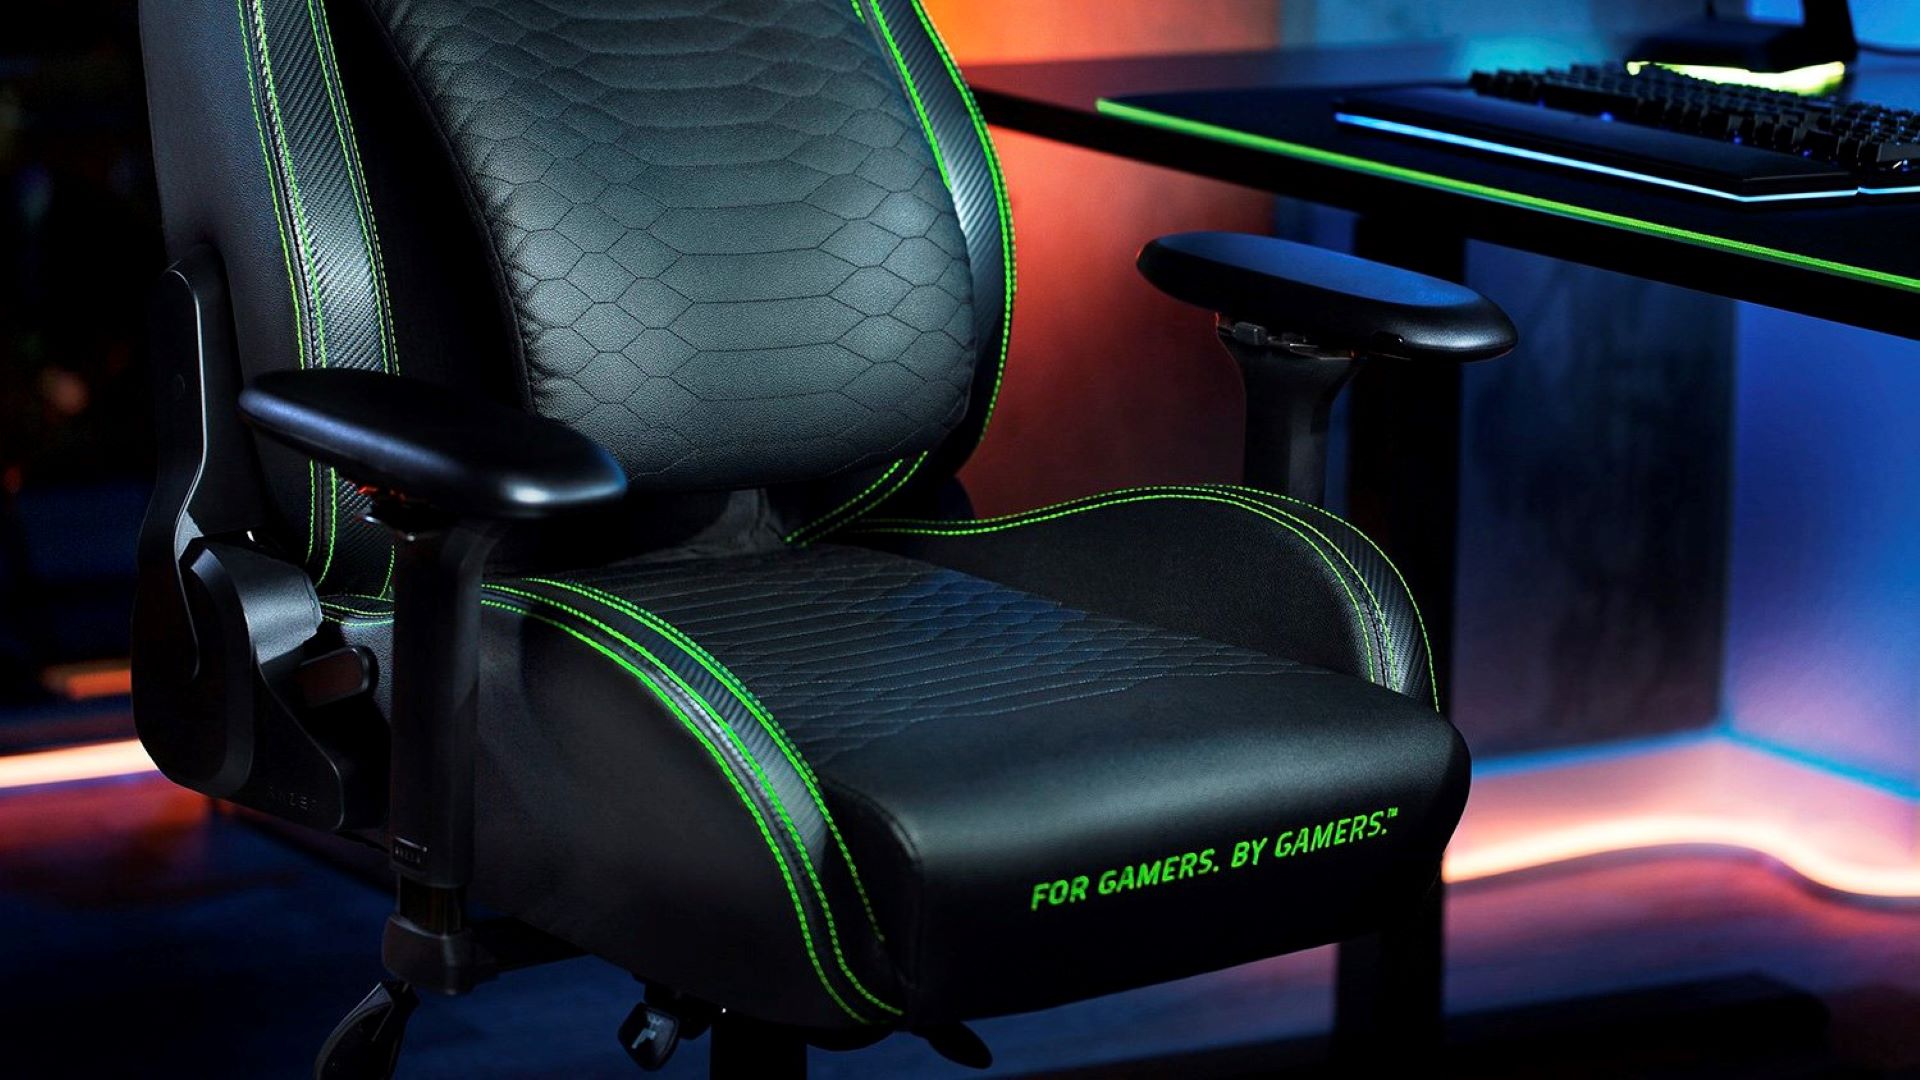 Comfort your tush with $100 off the Razer Iskur gaming chair on Amazon